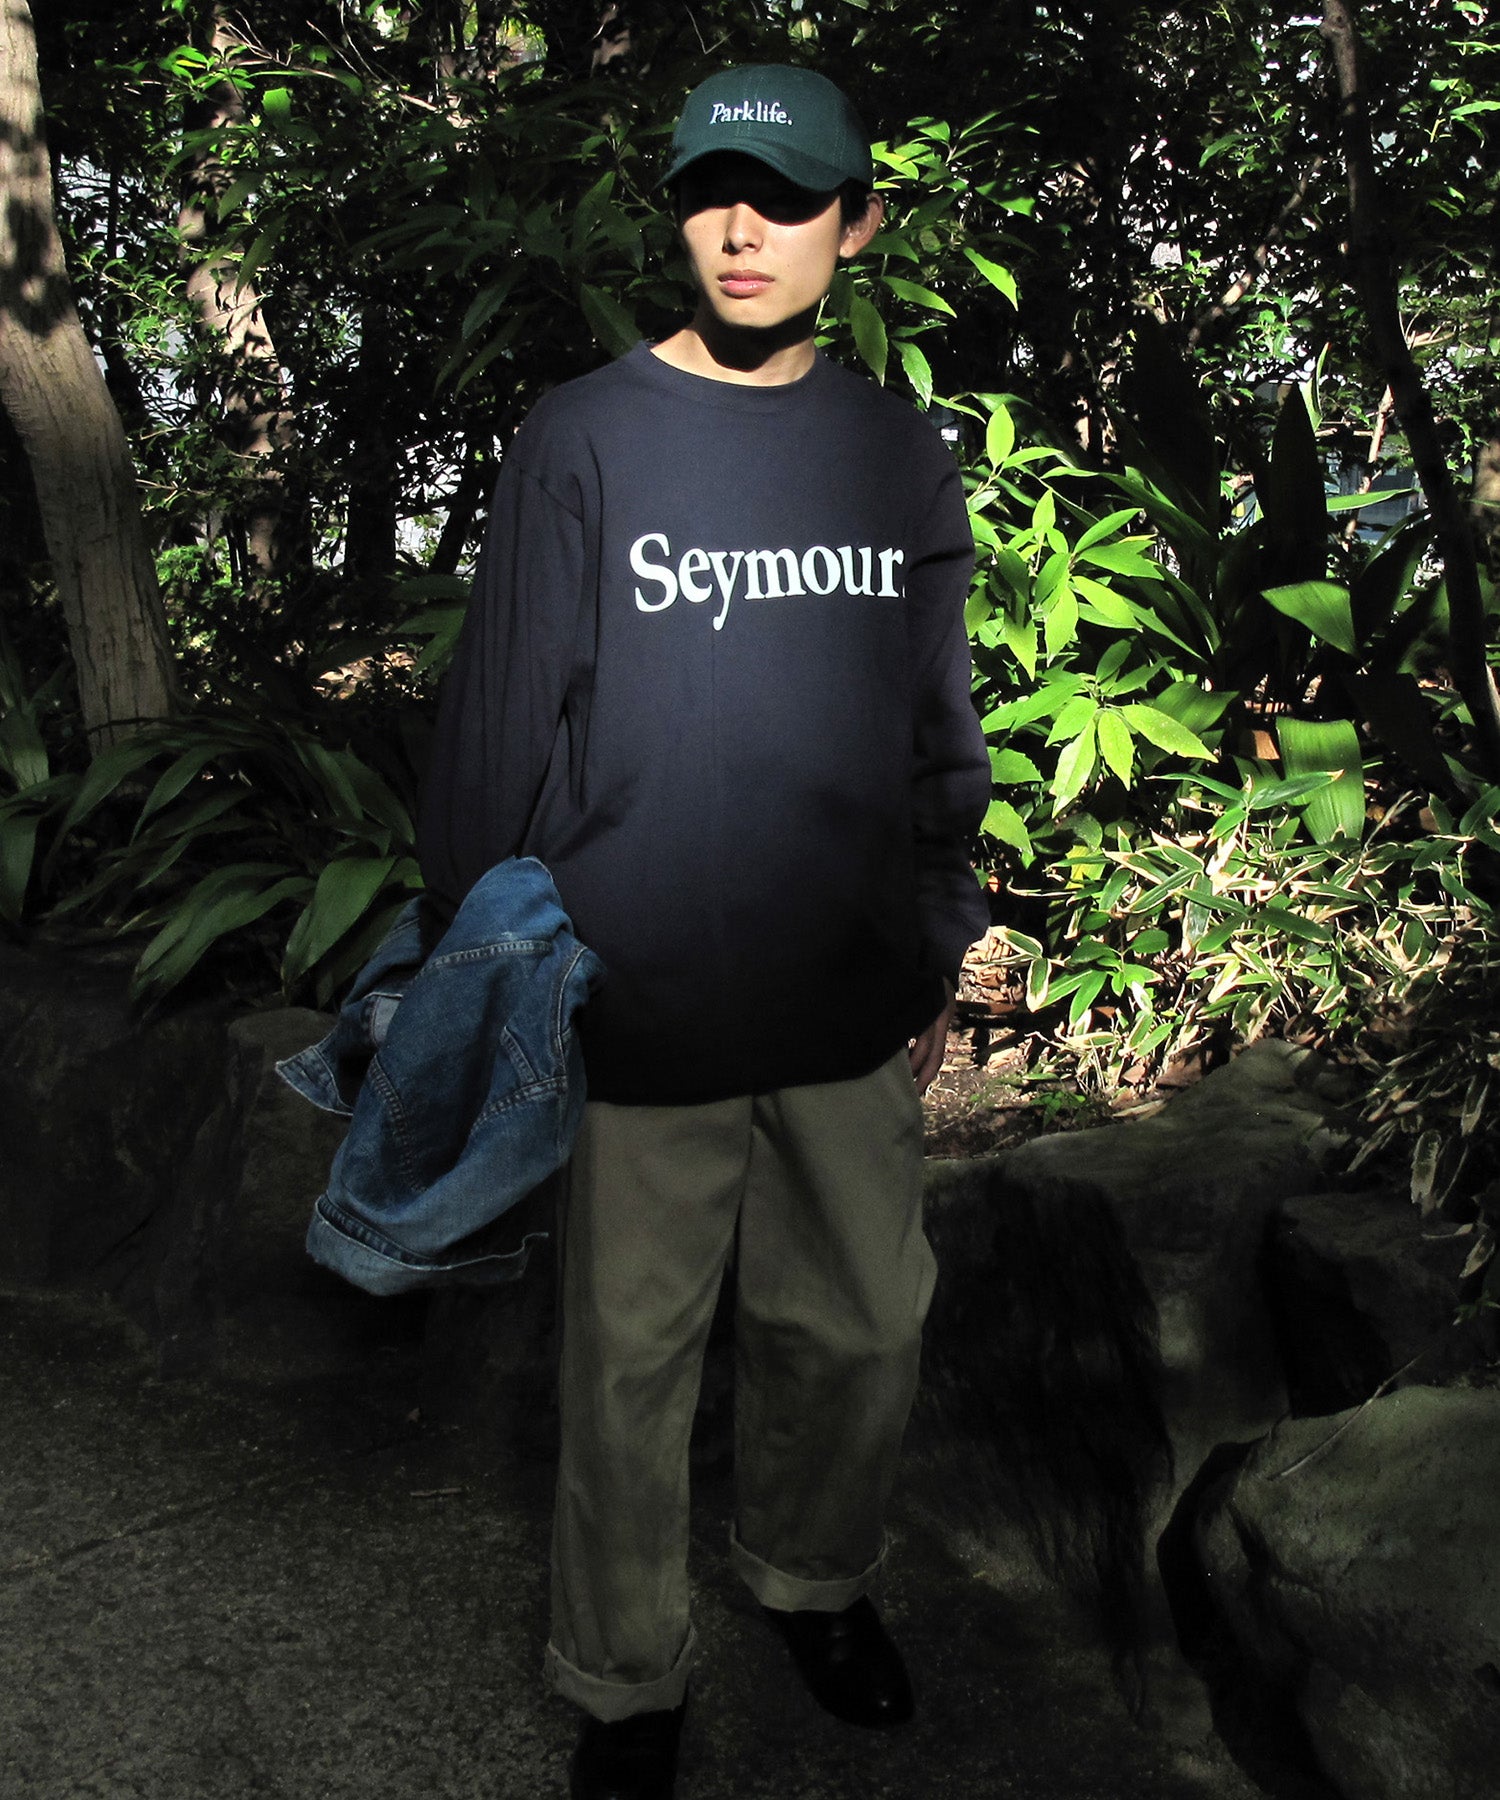 Seymour. "Parklife" EMBROIDERY CAP